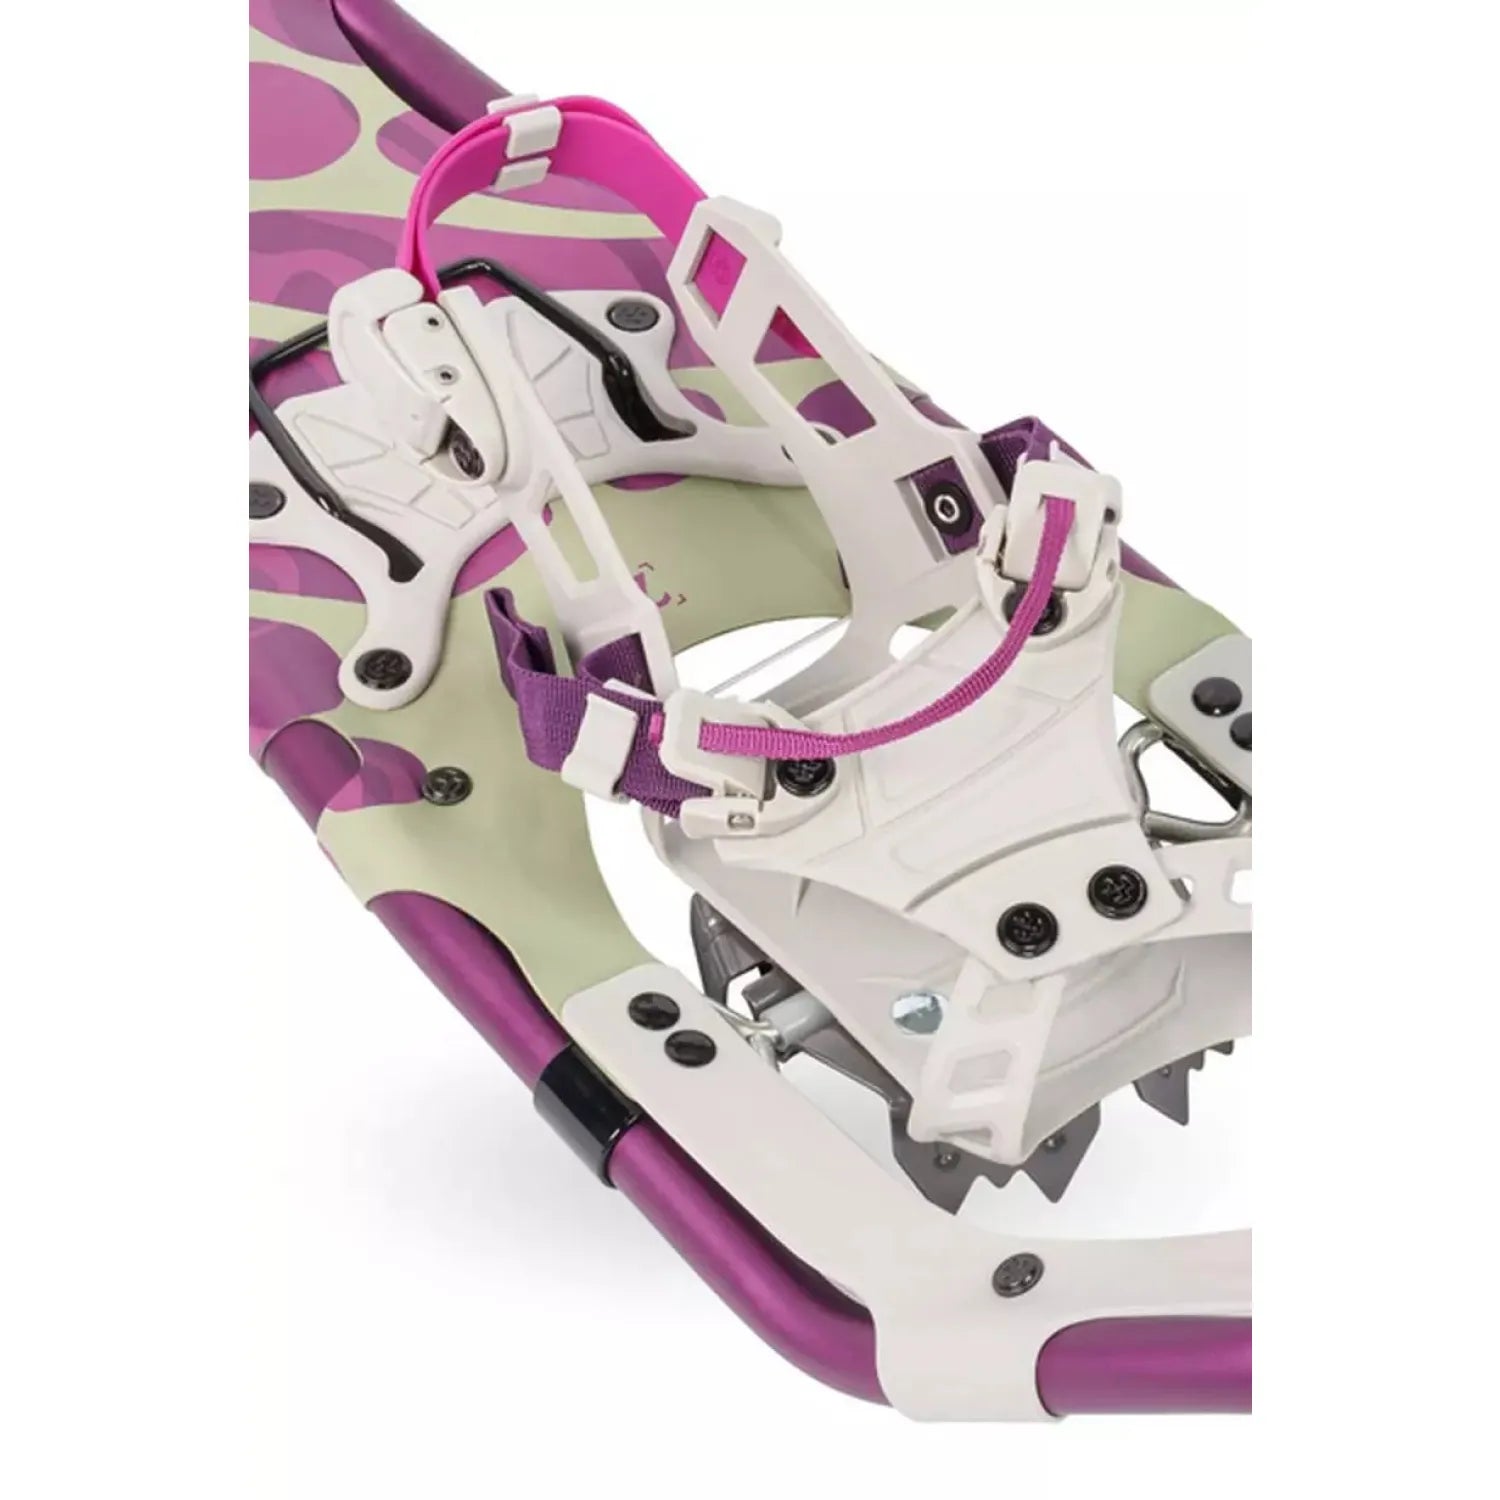 Tubbs Women's Wilderness 21" Snowshoe in Purple, detailed view of straps and buckle.